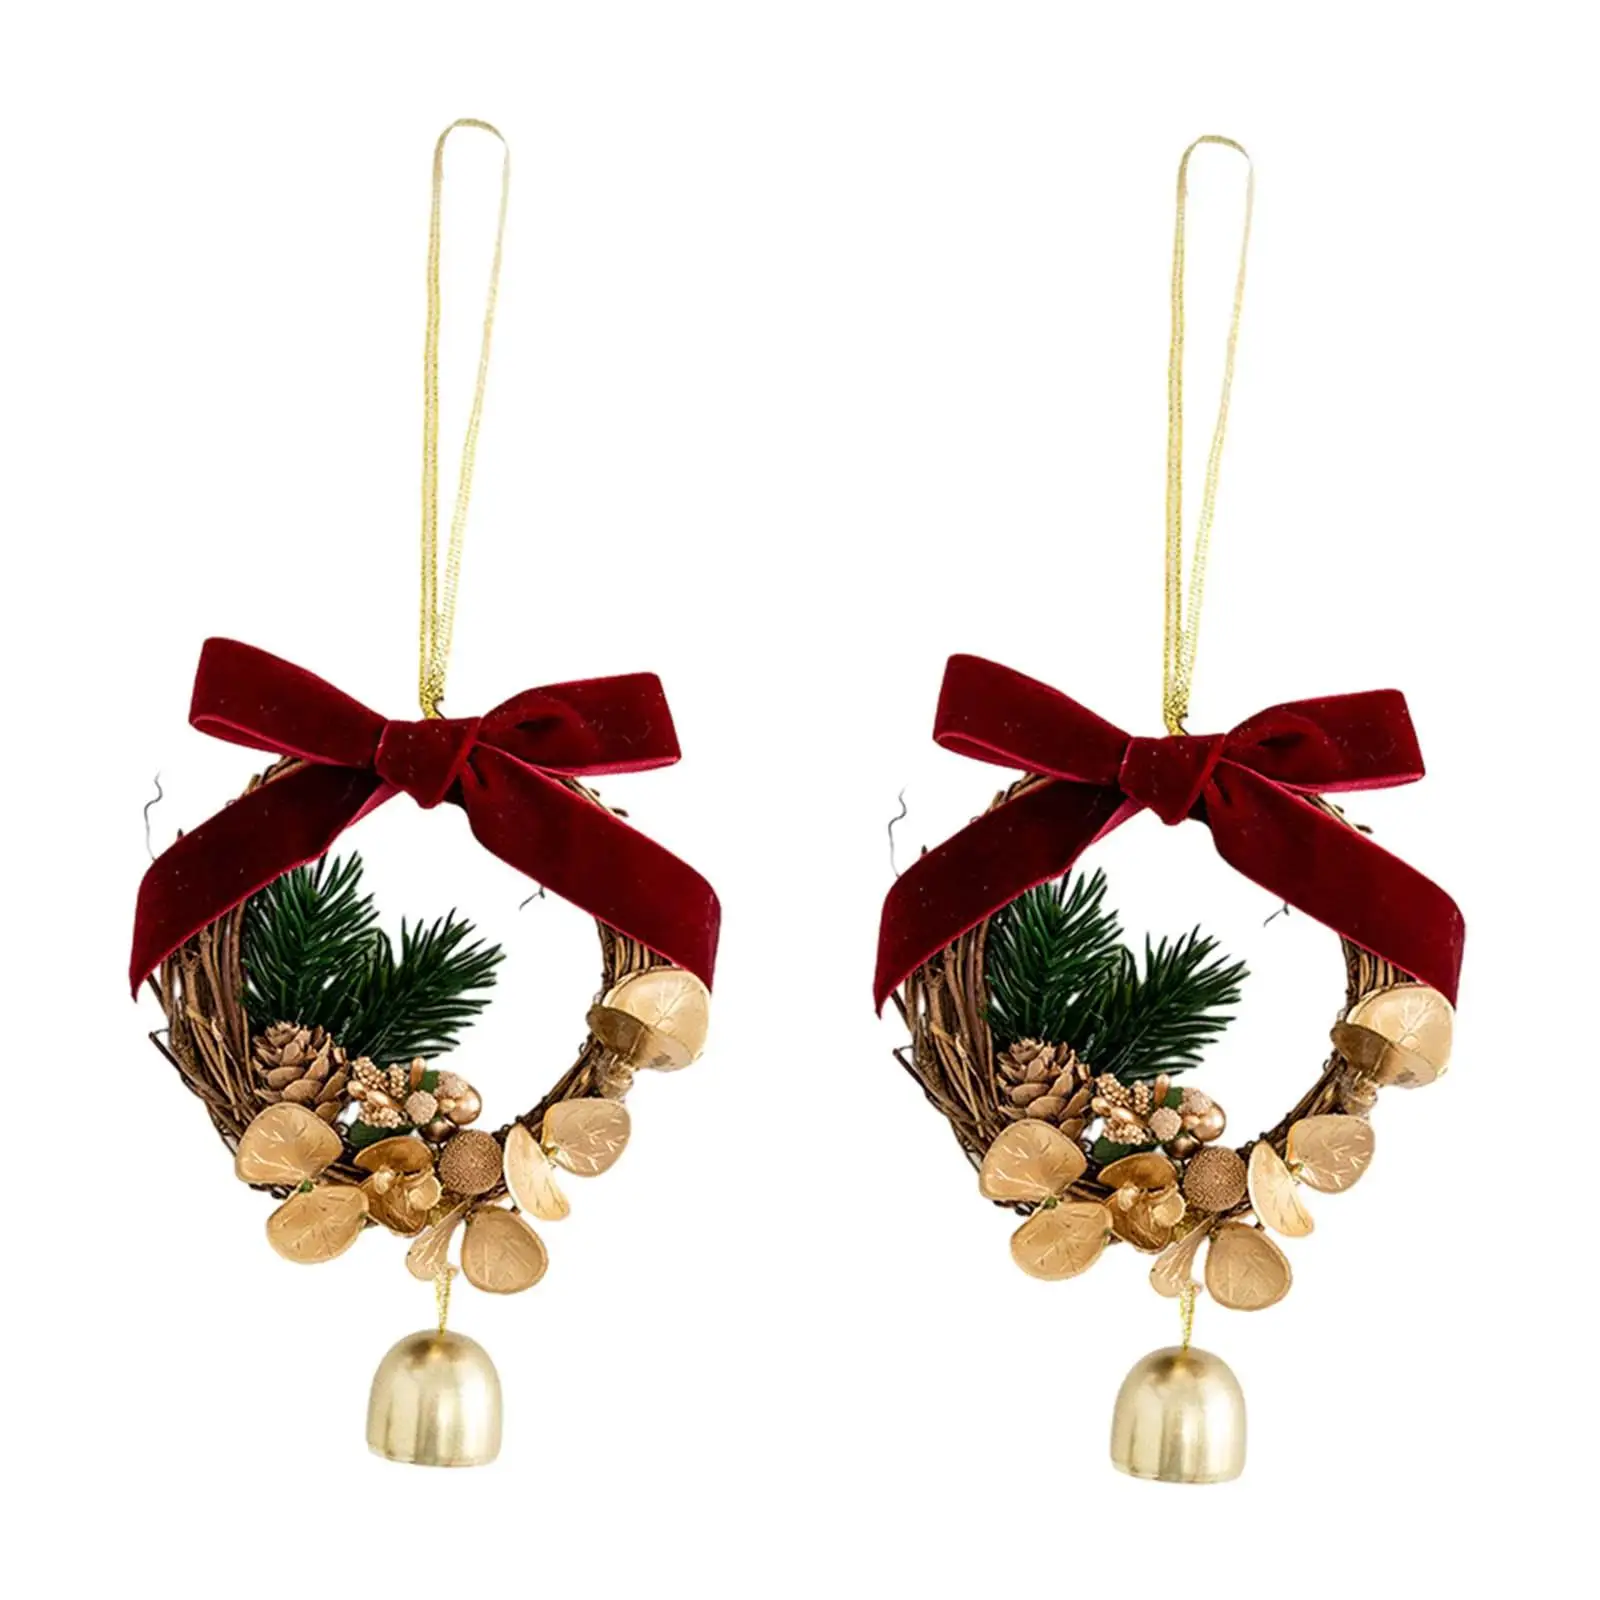 Mini Christmas Wreath Cabinet Wreaths for Chairs Christmas Party Holiday